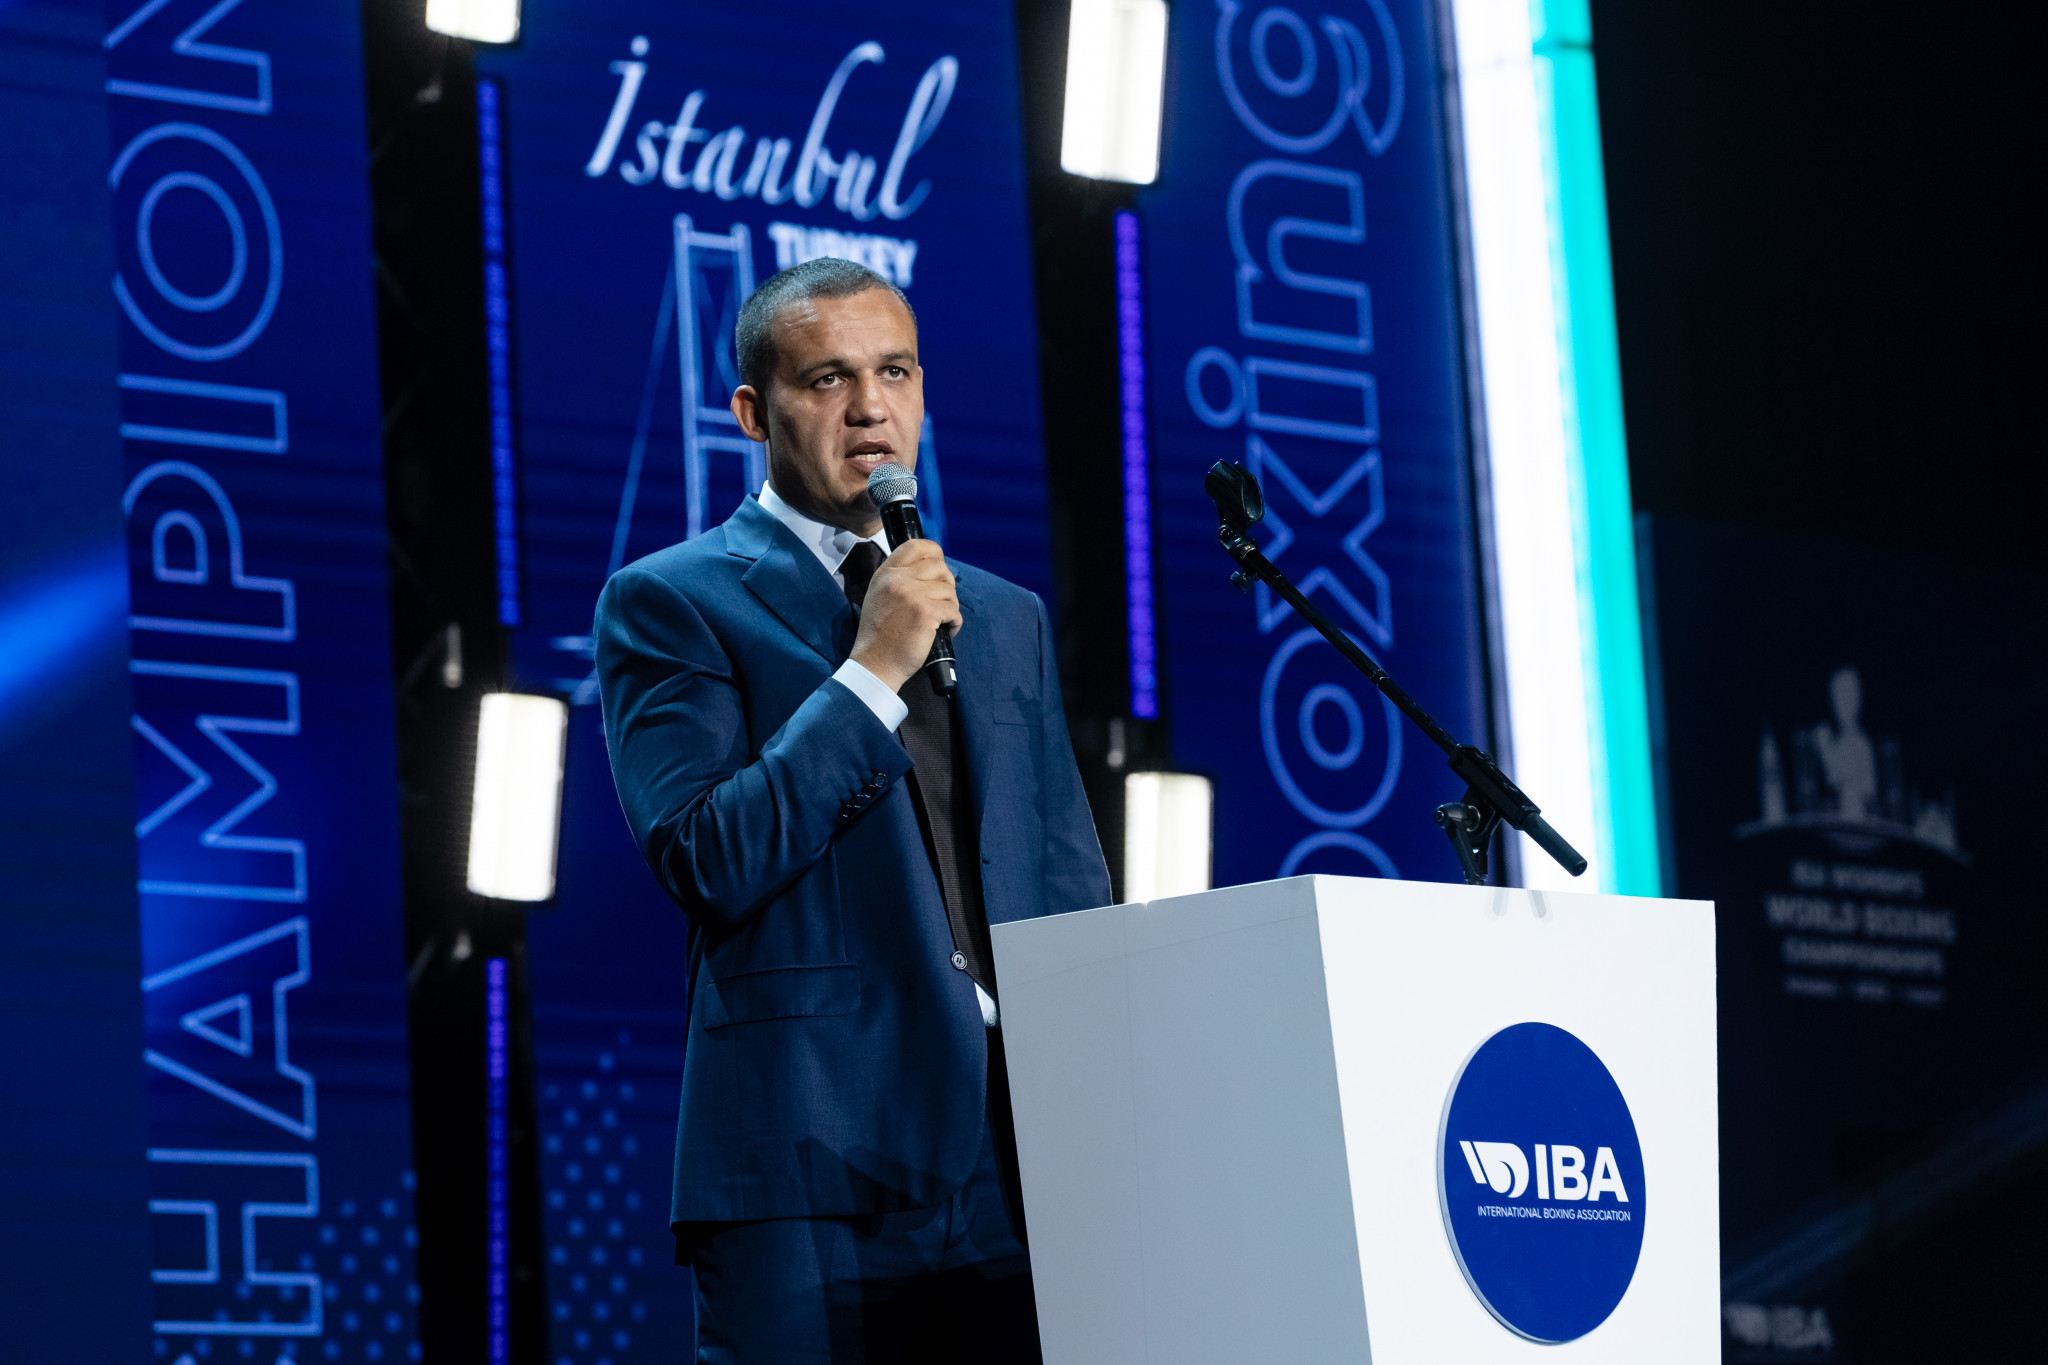 IBA President Umar Kremlev said the work of the independent group would work towards better governance ©IBA